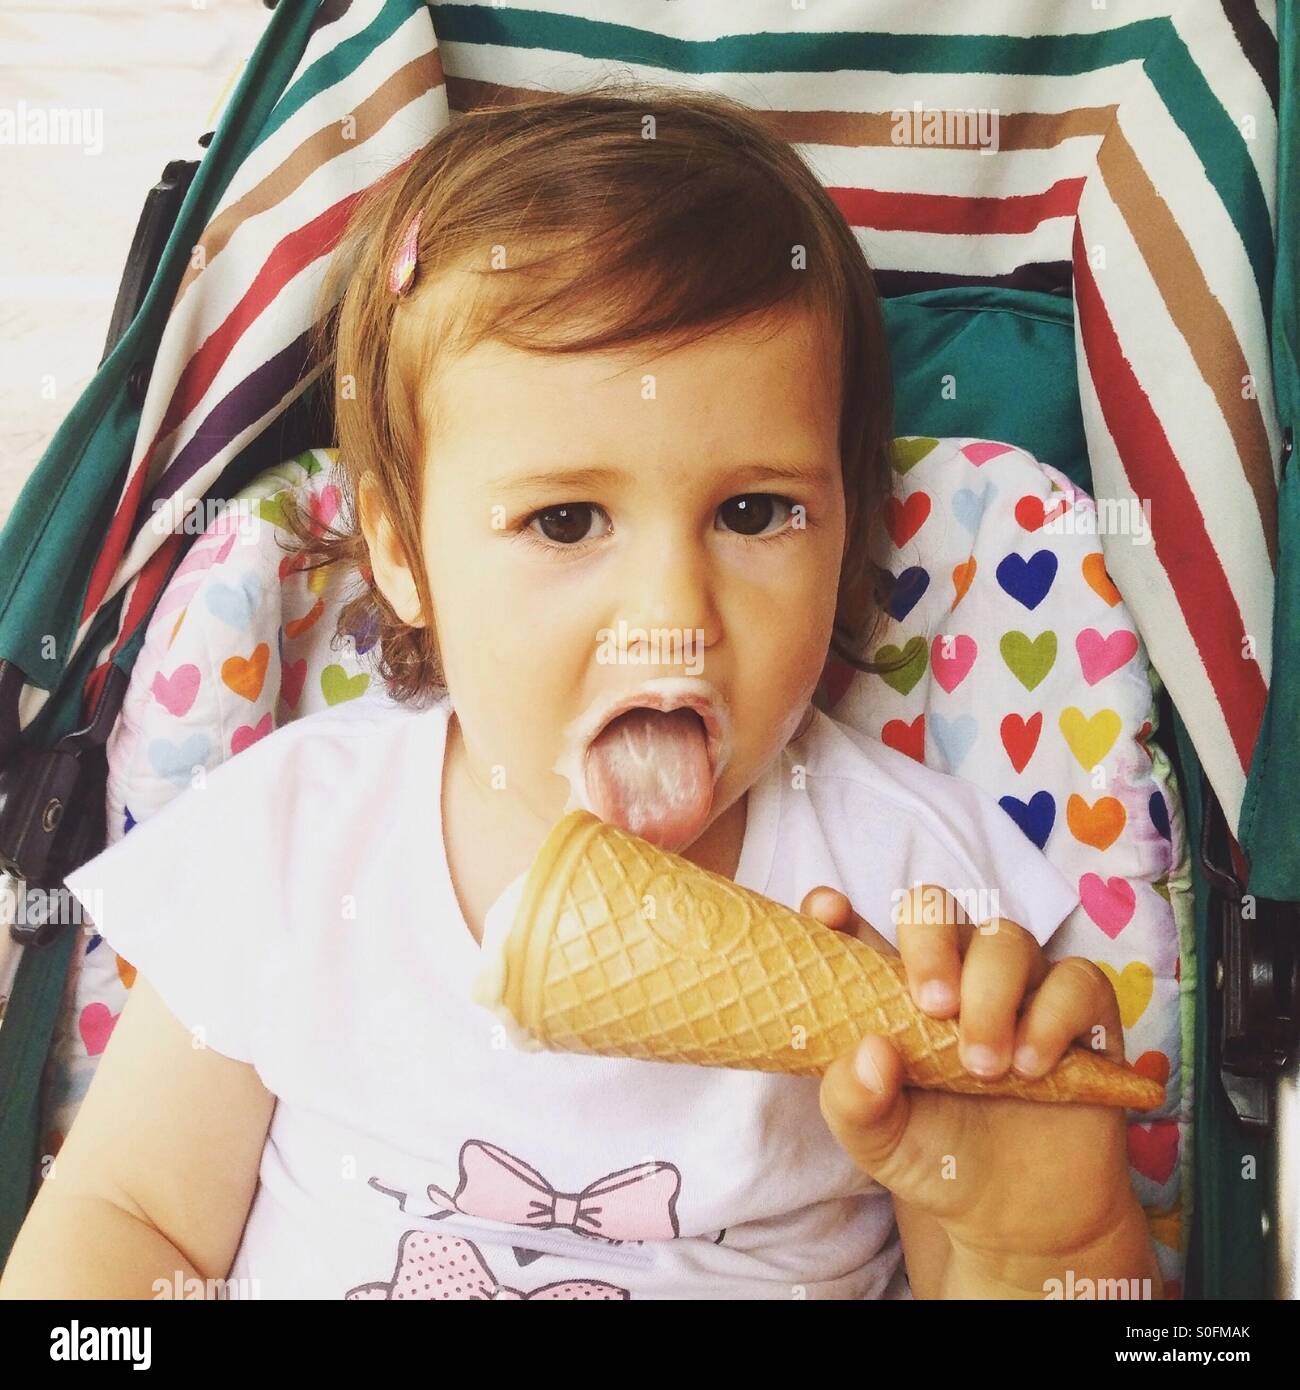 Cute little girl eating ice cream Banque D'Images